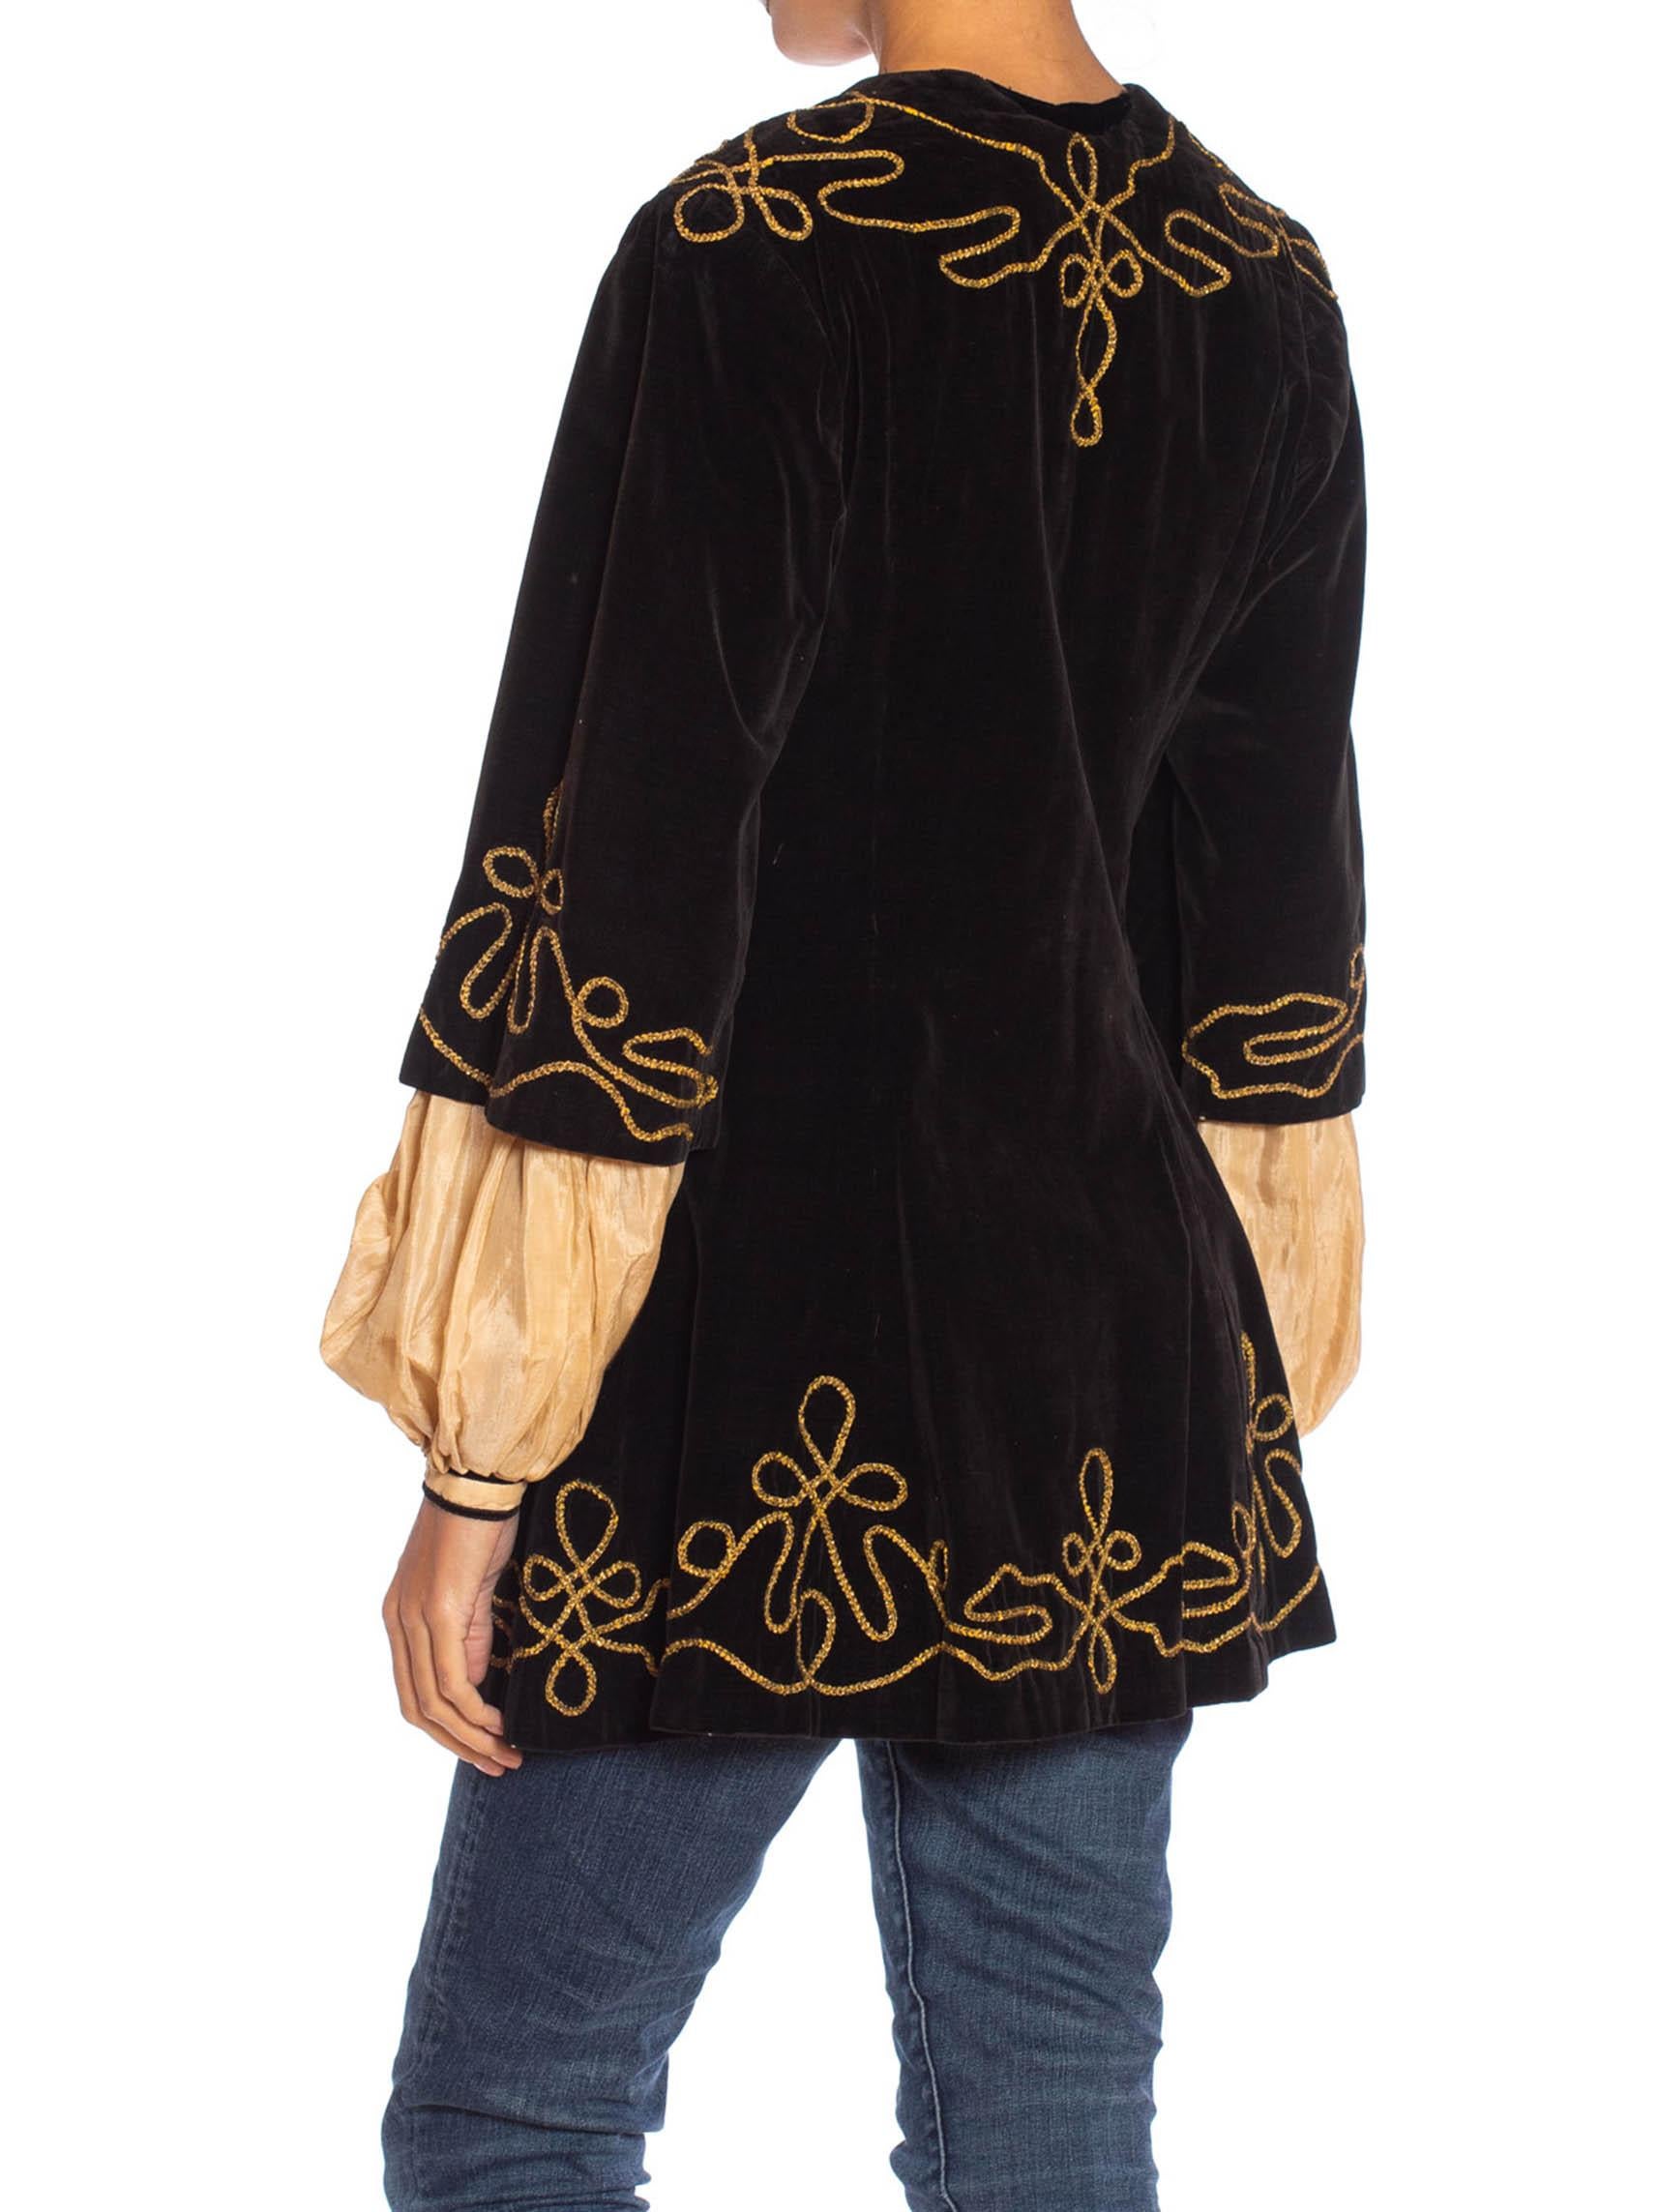 1900S Antique Black Cotton Velvet Medieval Theatrical Costume Jacket With Gold  In Excellent Condition For Sale In New York, NY